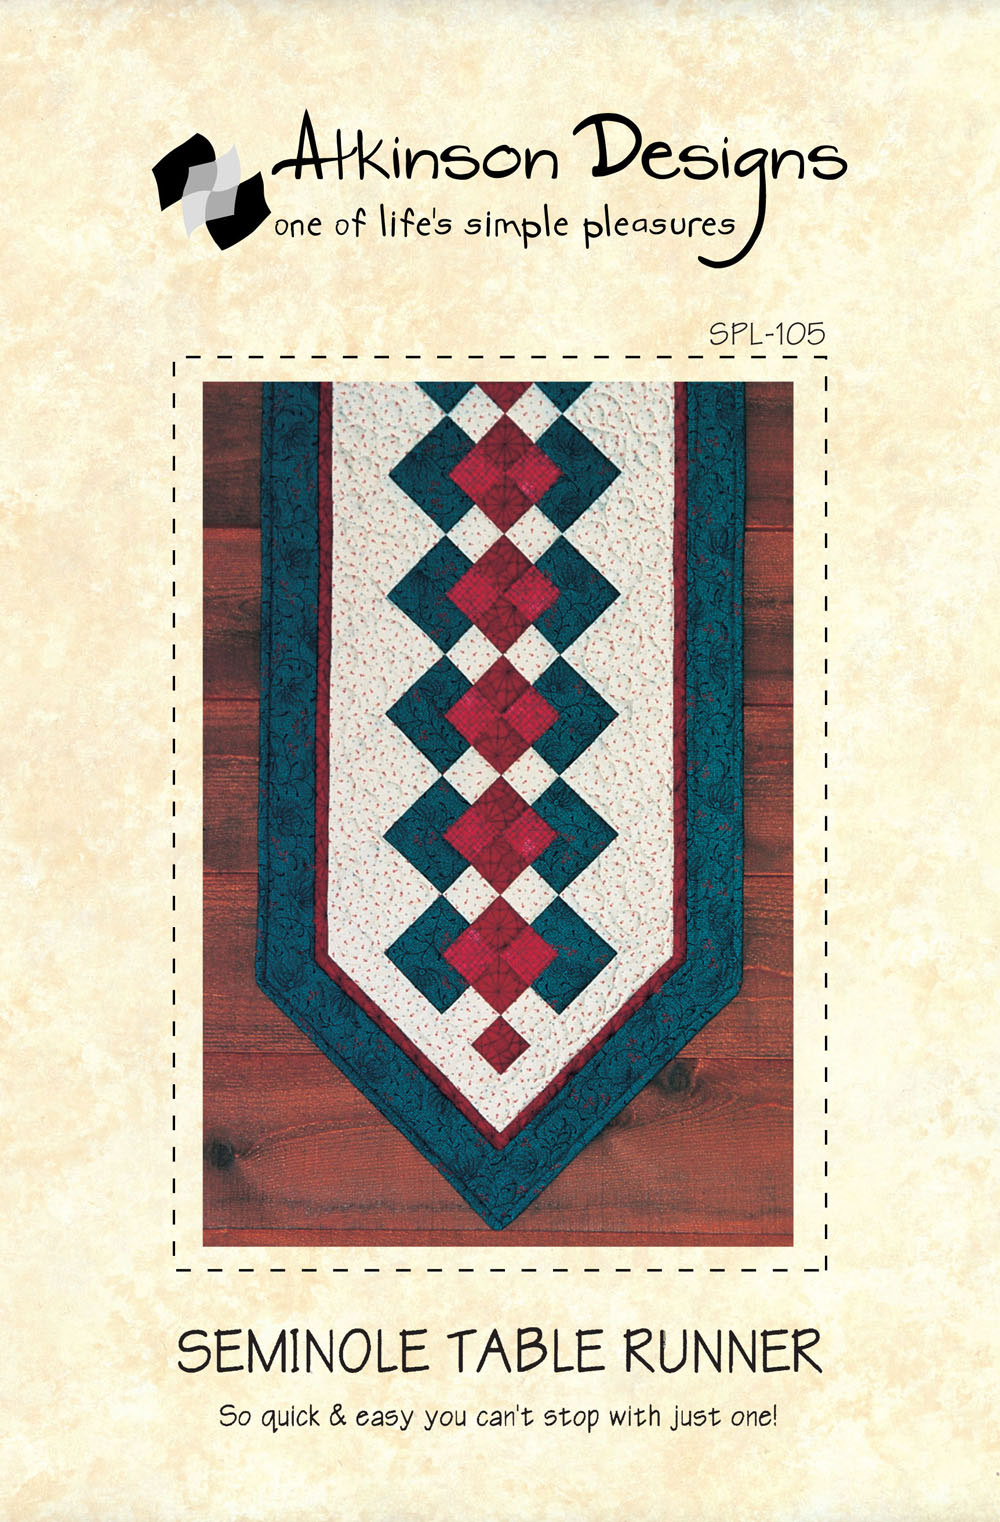 Seminole-Table-Runner-sewing-pattern-Atkinson-Designs-front